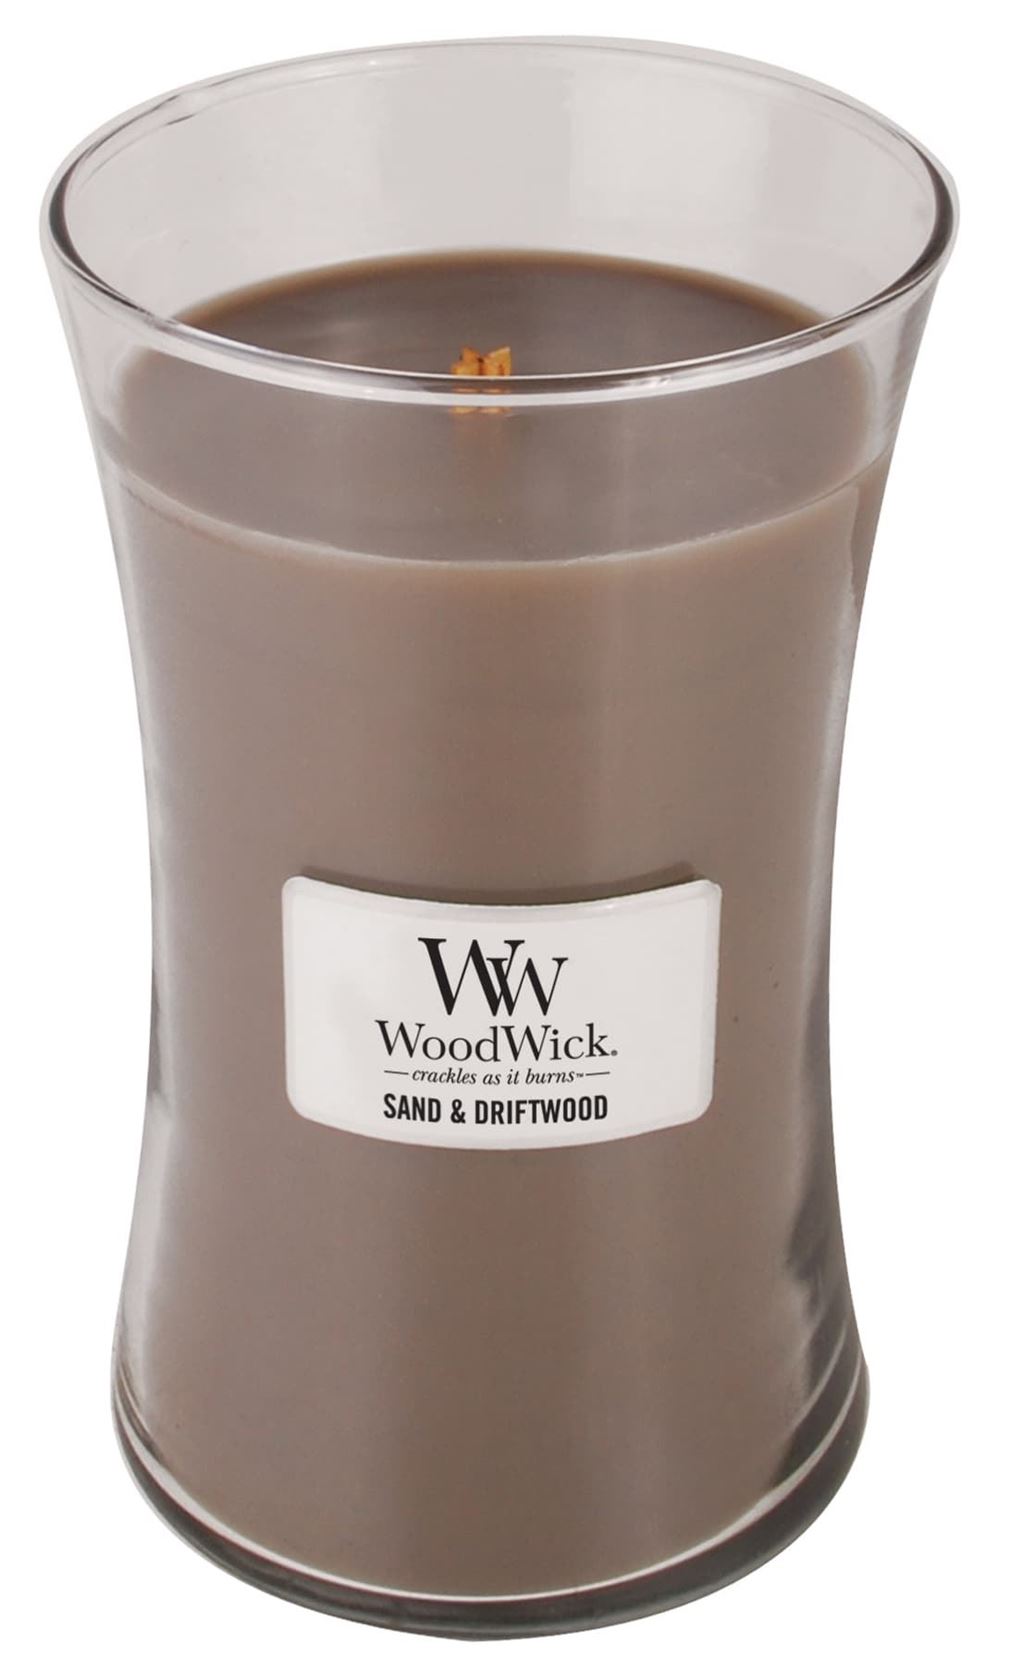 Woodwick Large Hourglass Candle - Sand & Driftwood - Geurkaars